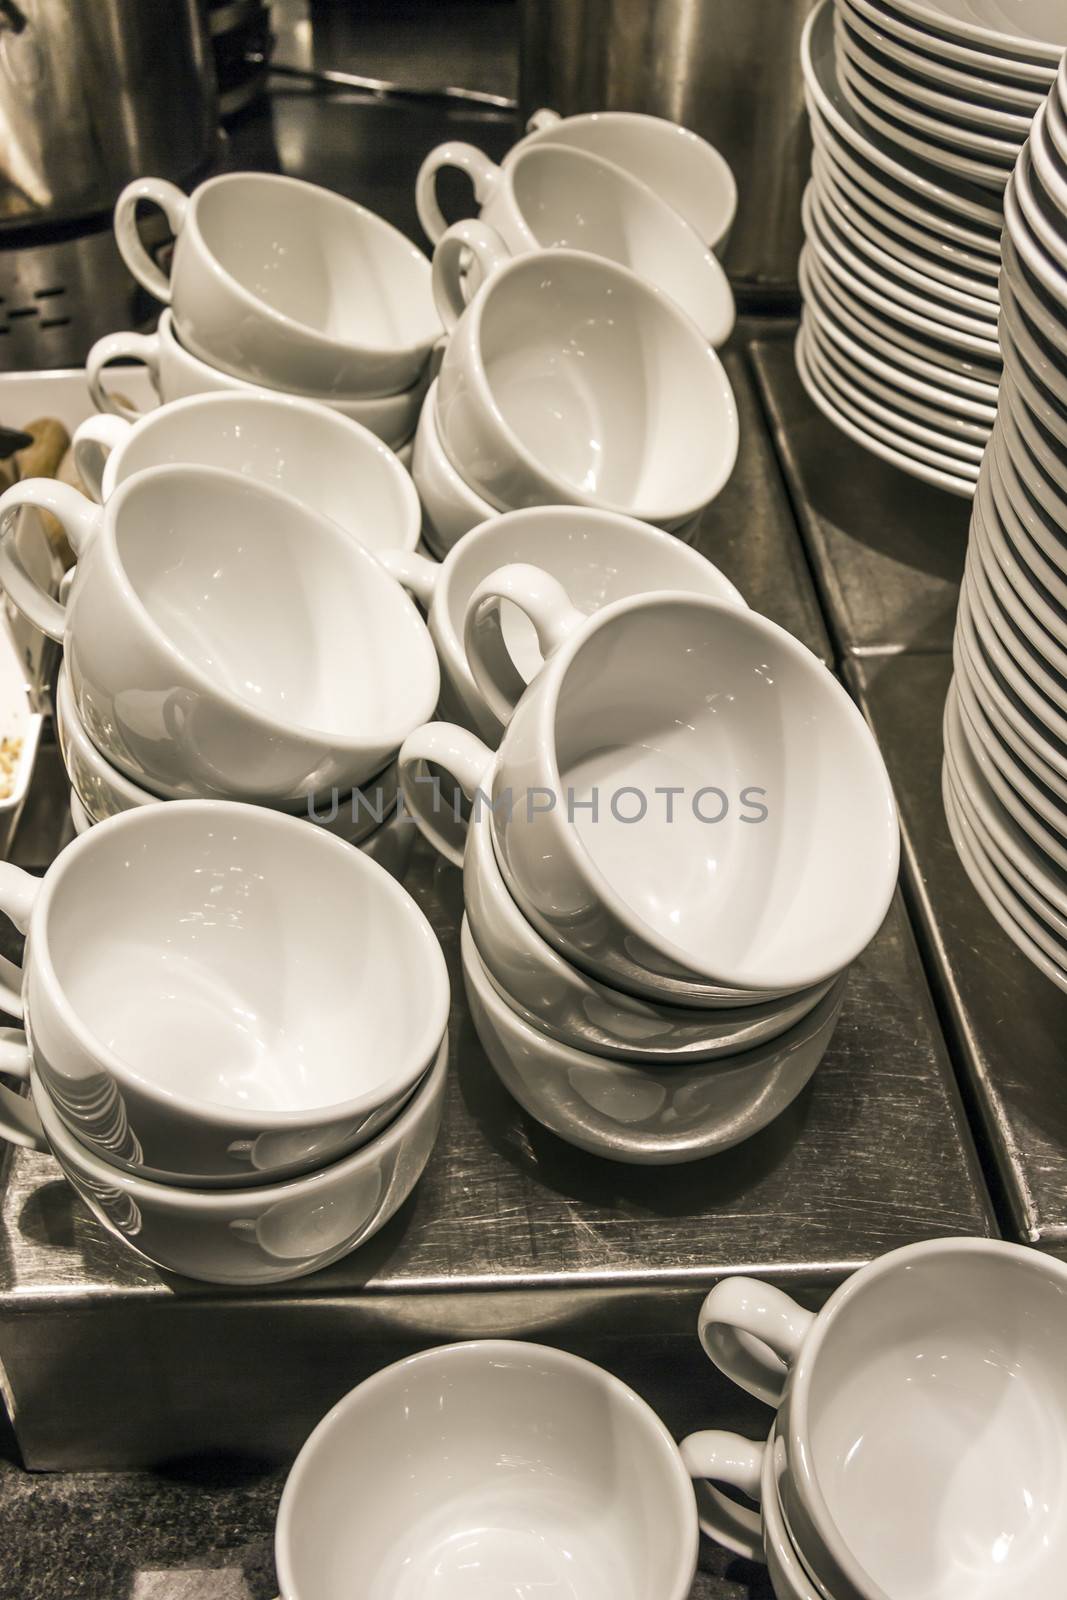 Stacks of white bowls against a restaurant background by Tetyana